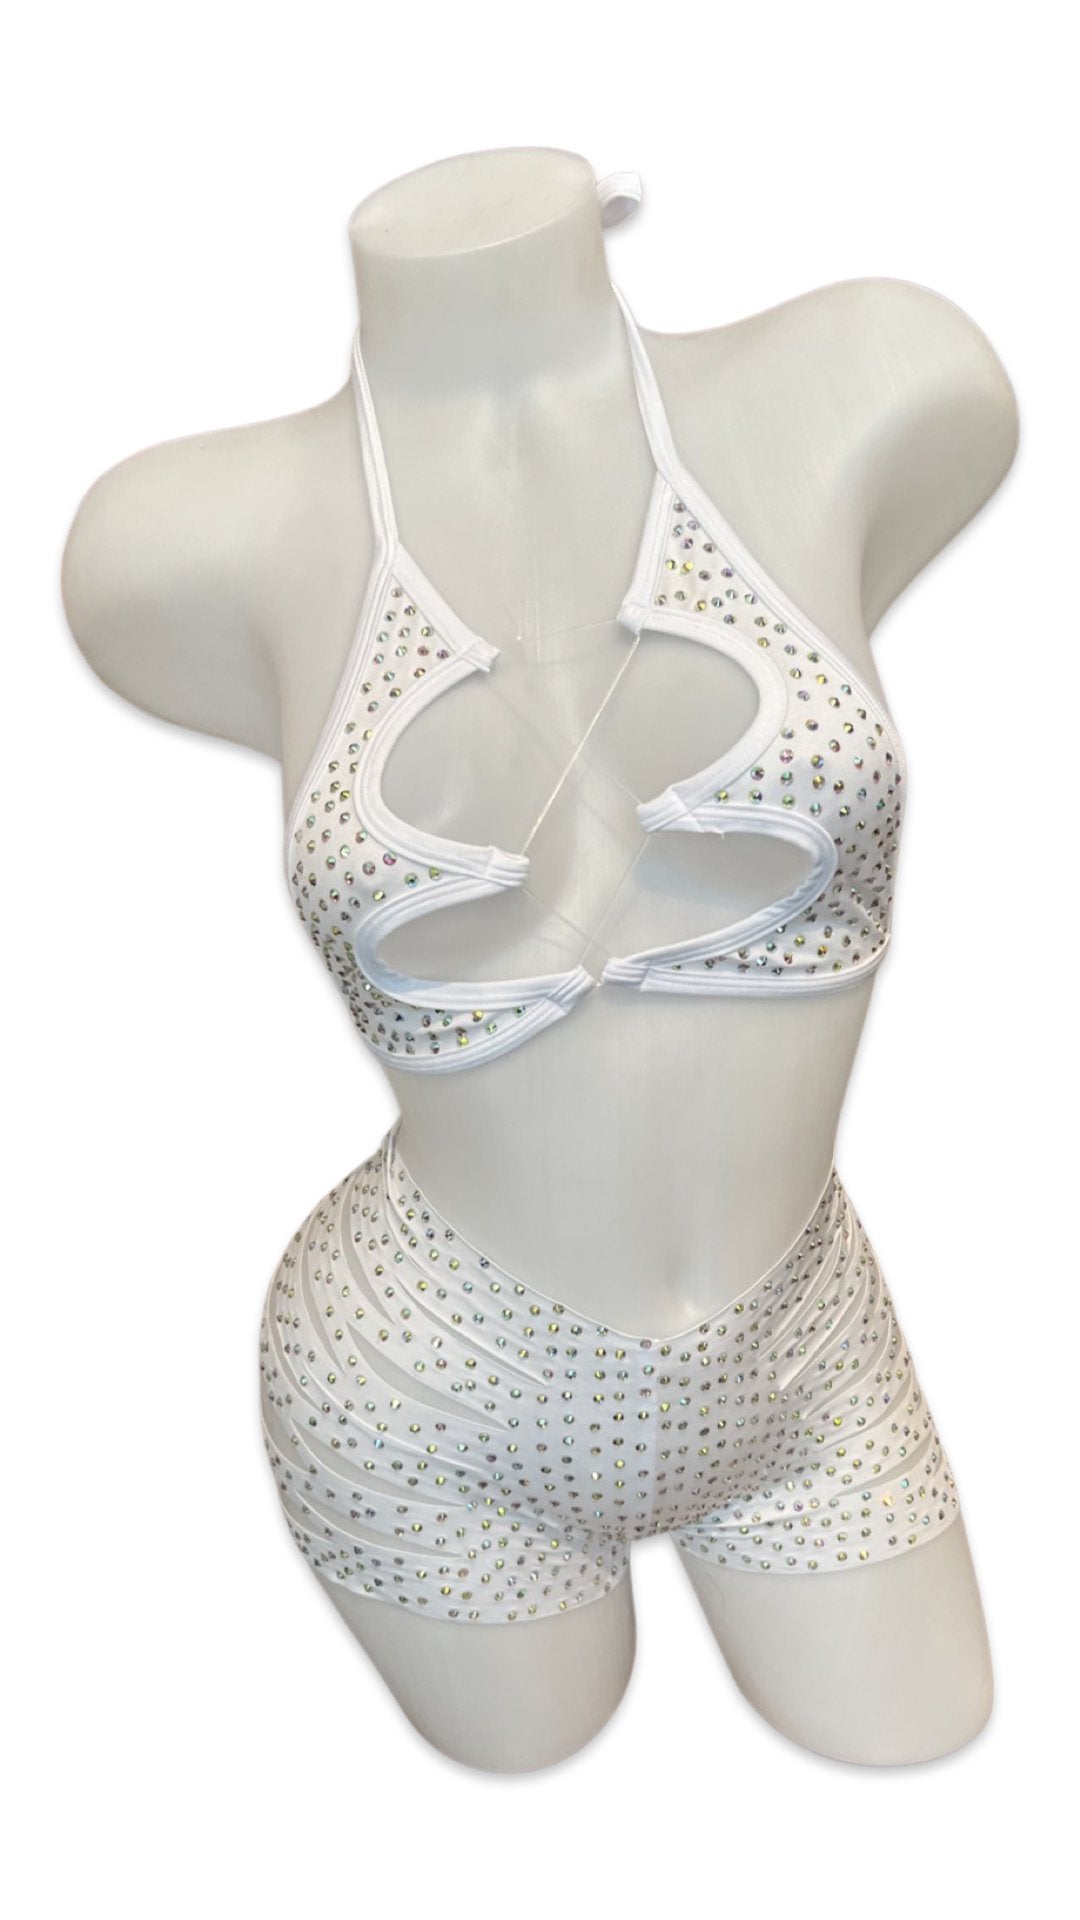 Rhinestone Halter Top and Cut Out Short Set White - Model Express VancouverBikini